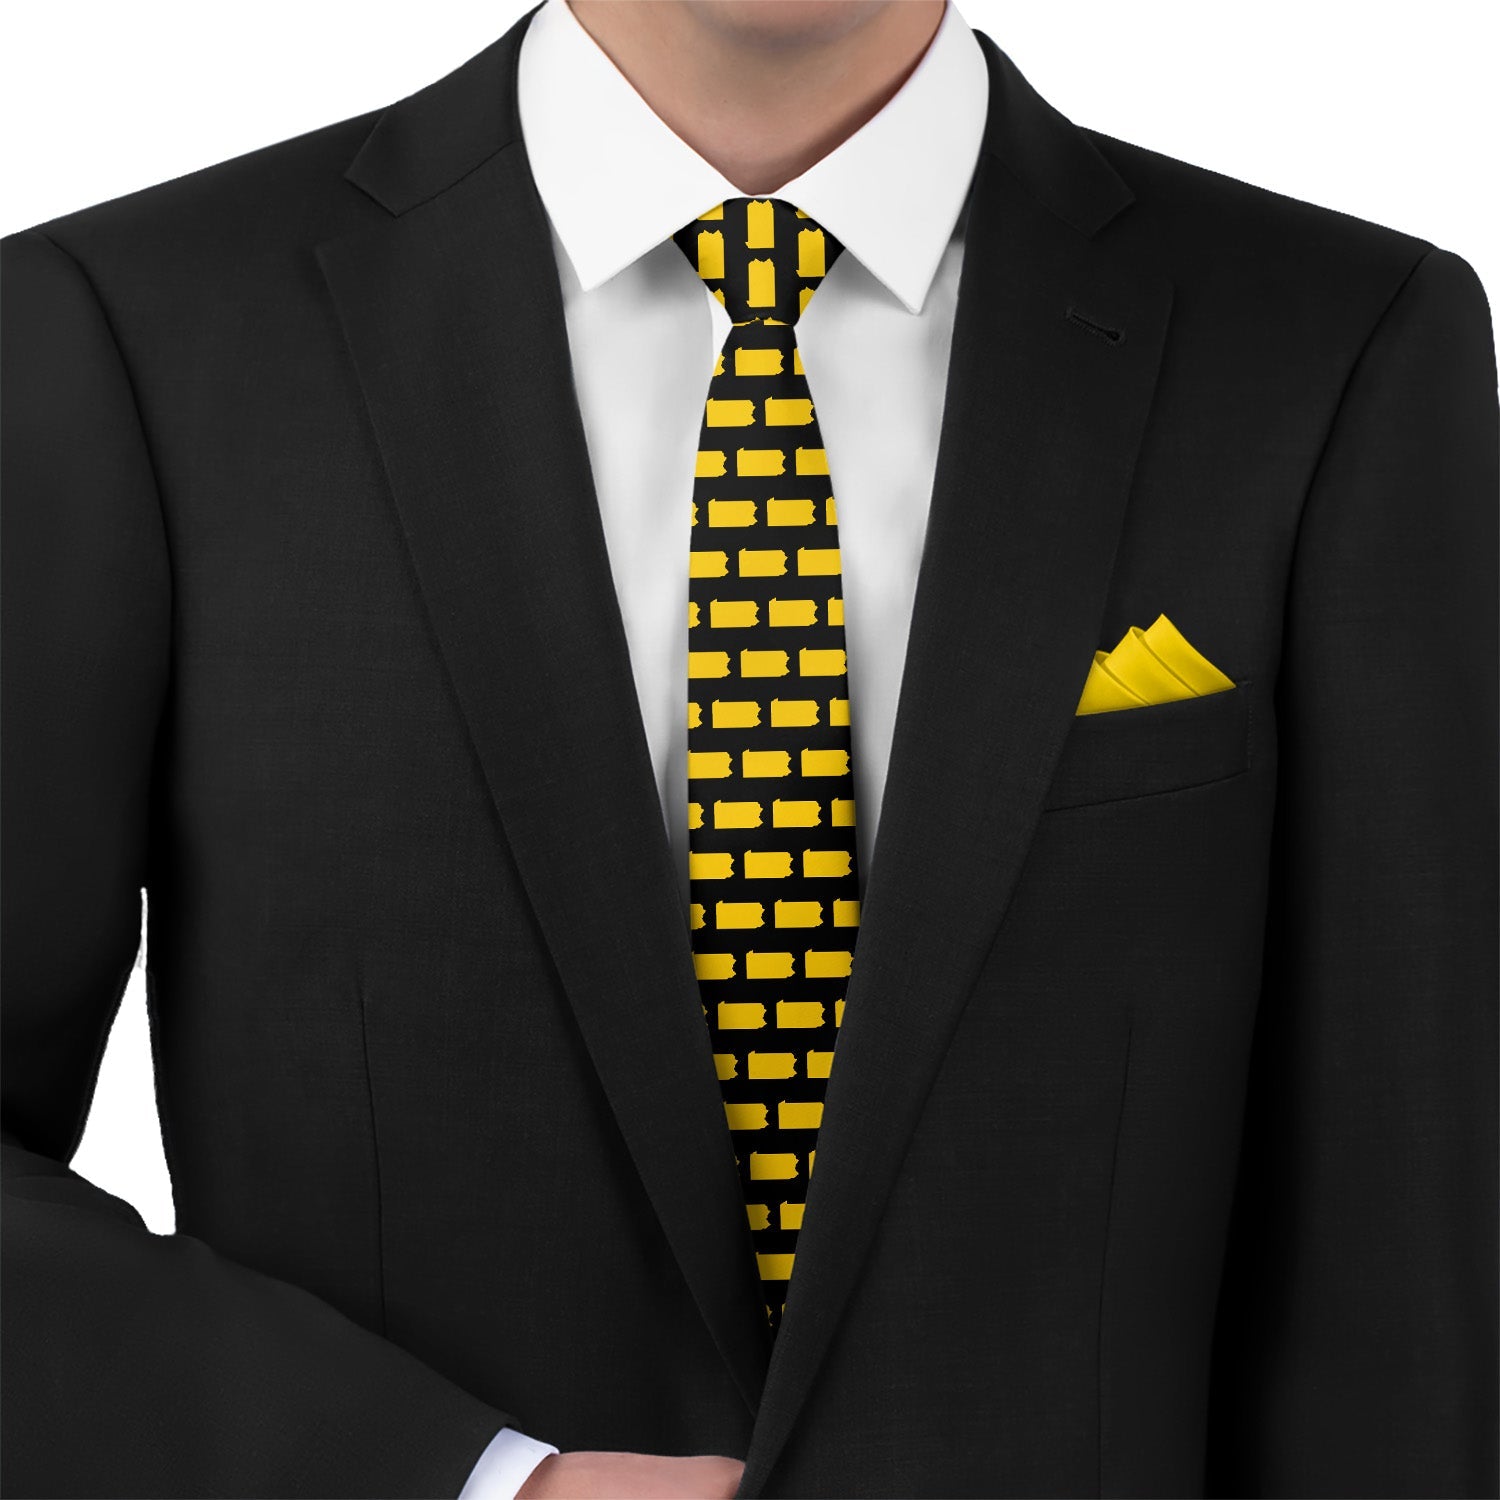 Pennsylvania State Outline Necktie - Matching Pocket Square - Knotty Tie Co.